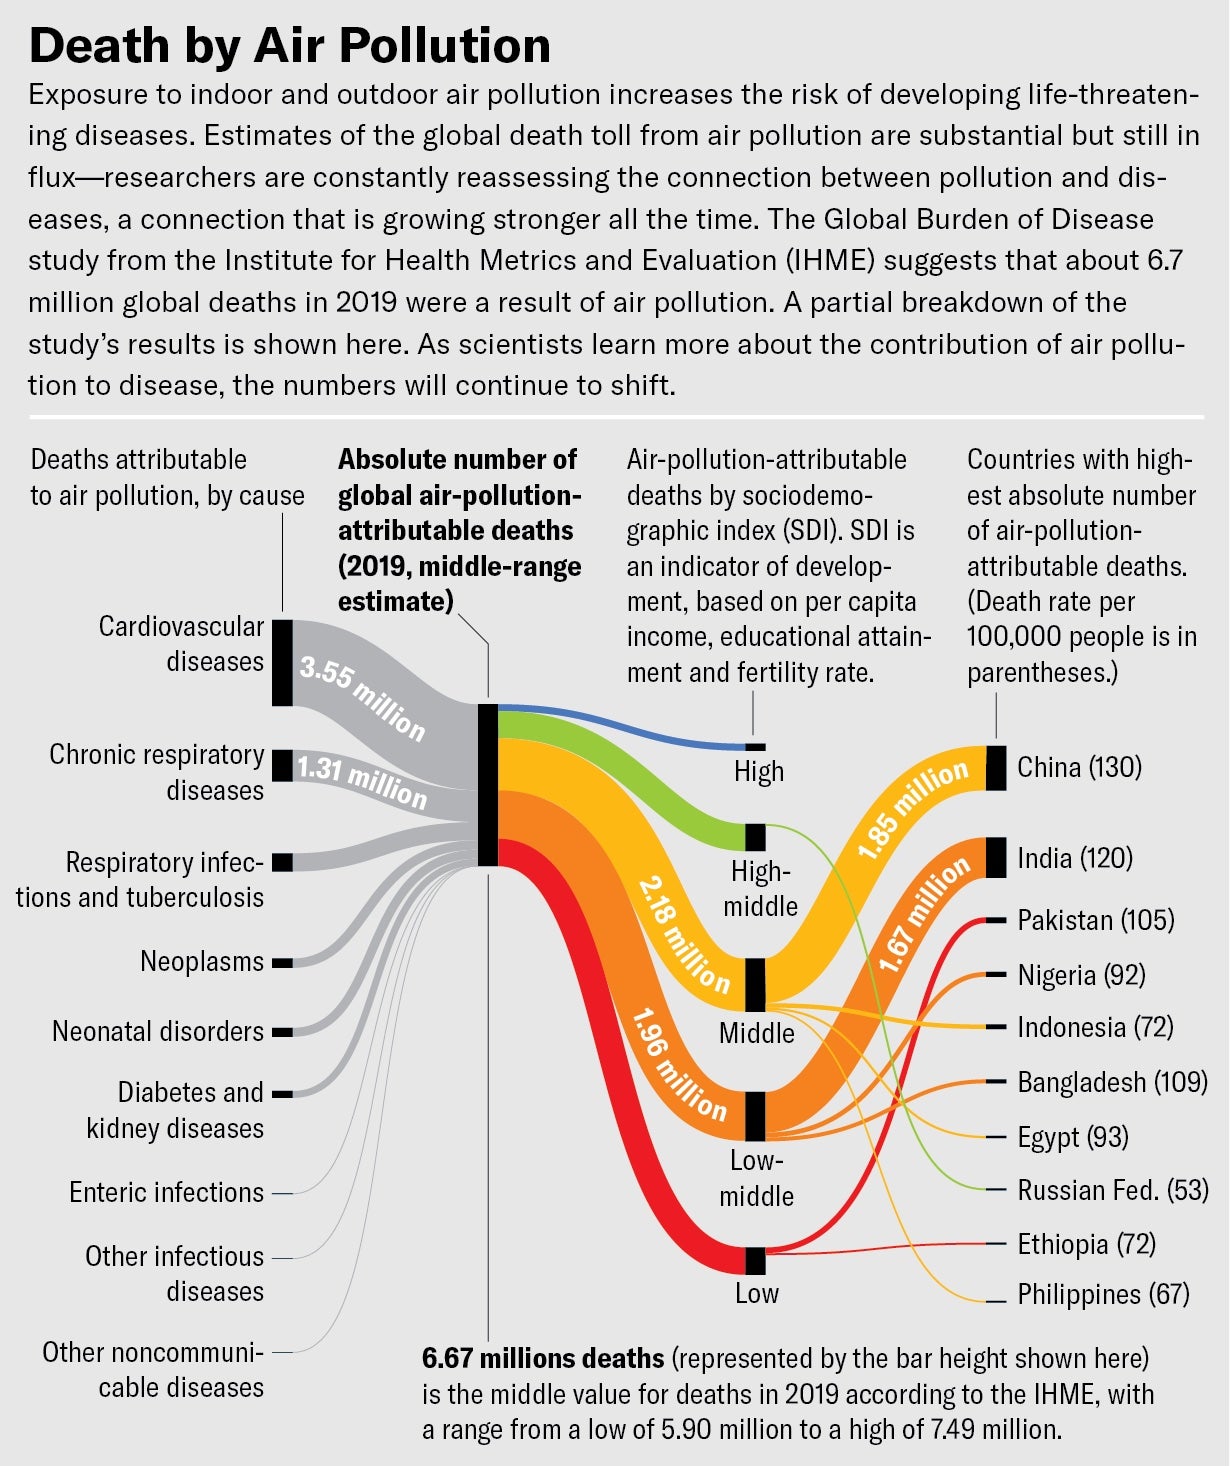 A Sankey diagram shows air-pollution related mortality data from the IHME’s Global Burden of Disease study for 2019, broken down by cause, sociodemographic index, and ten countries with the highest absolute number of air-pollution-attributable deaths.